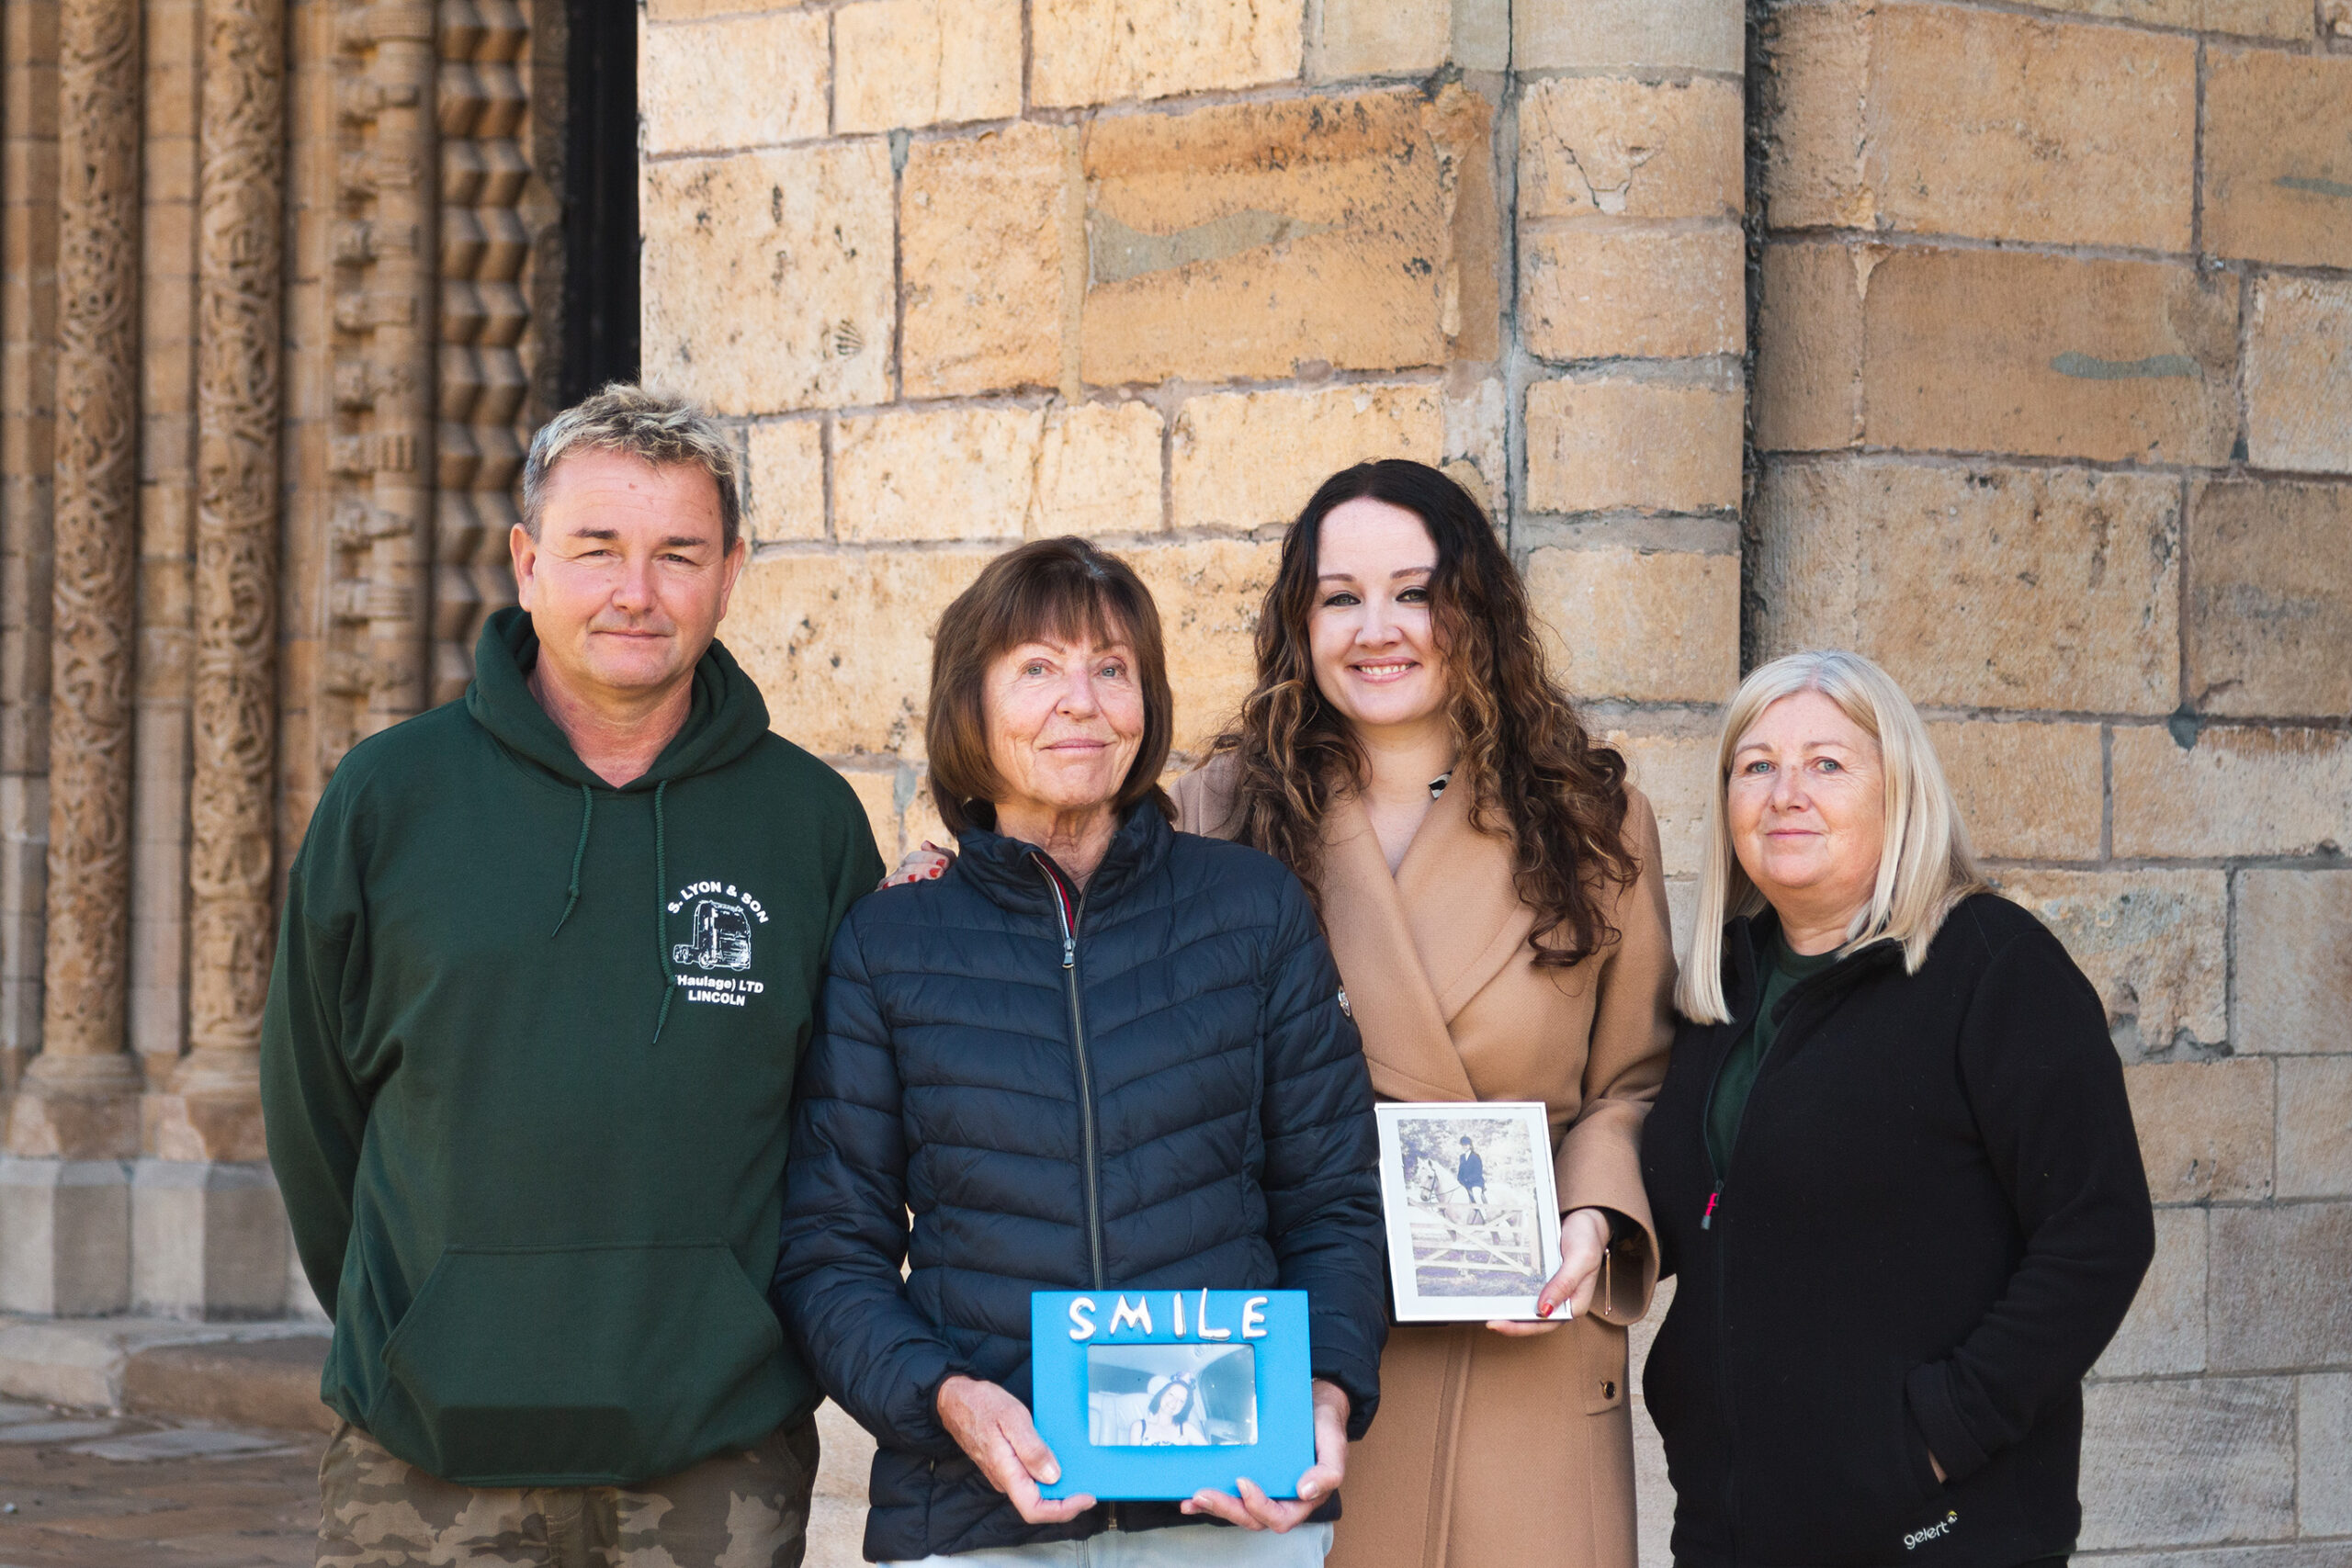 Members, of the Lyon family, together at Lincoln Cathedral, holding photographs of Sharon, who was cared for by the hospice before she passed away.